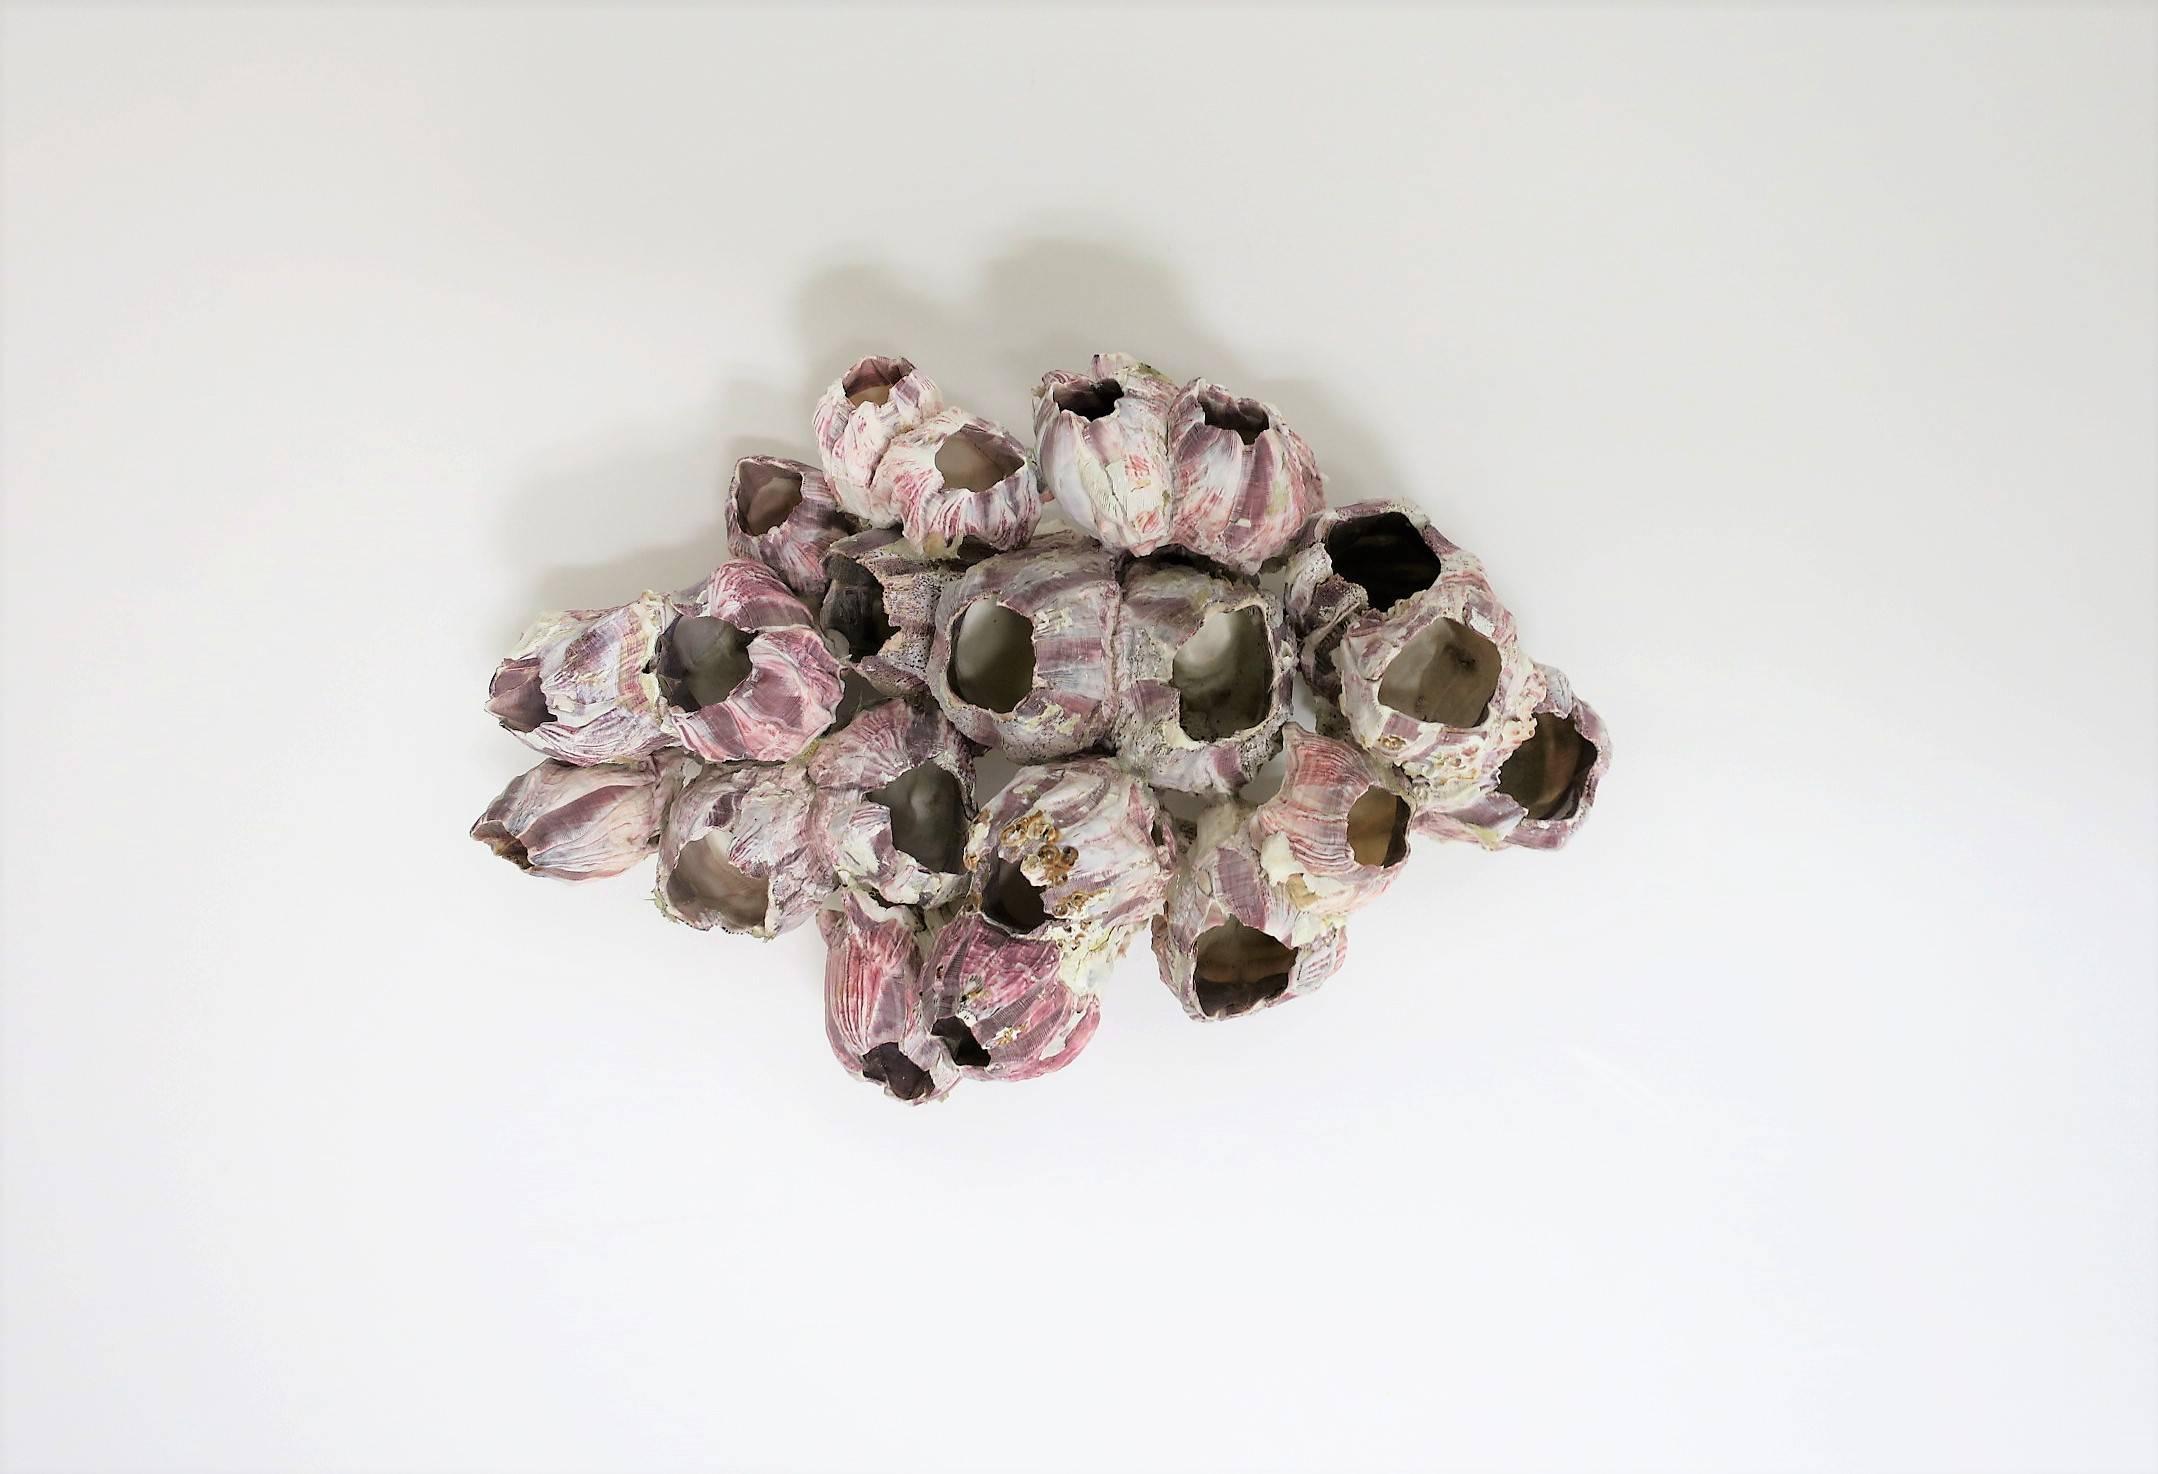 Organic Modern Vintage White and Purple Barnacle Coral Specimen Sculpture